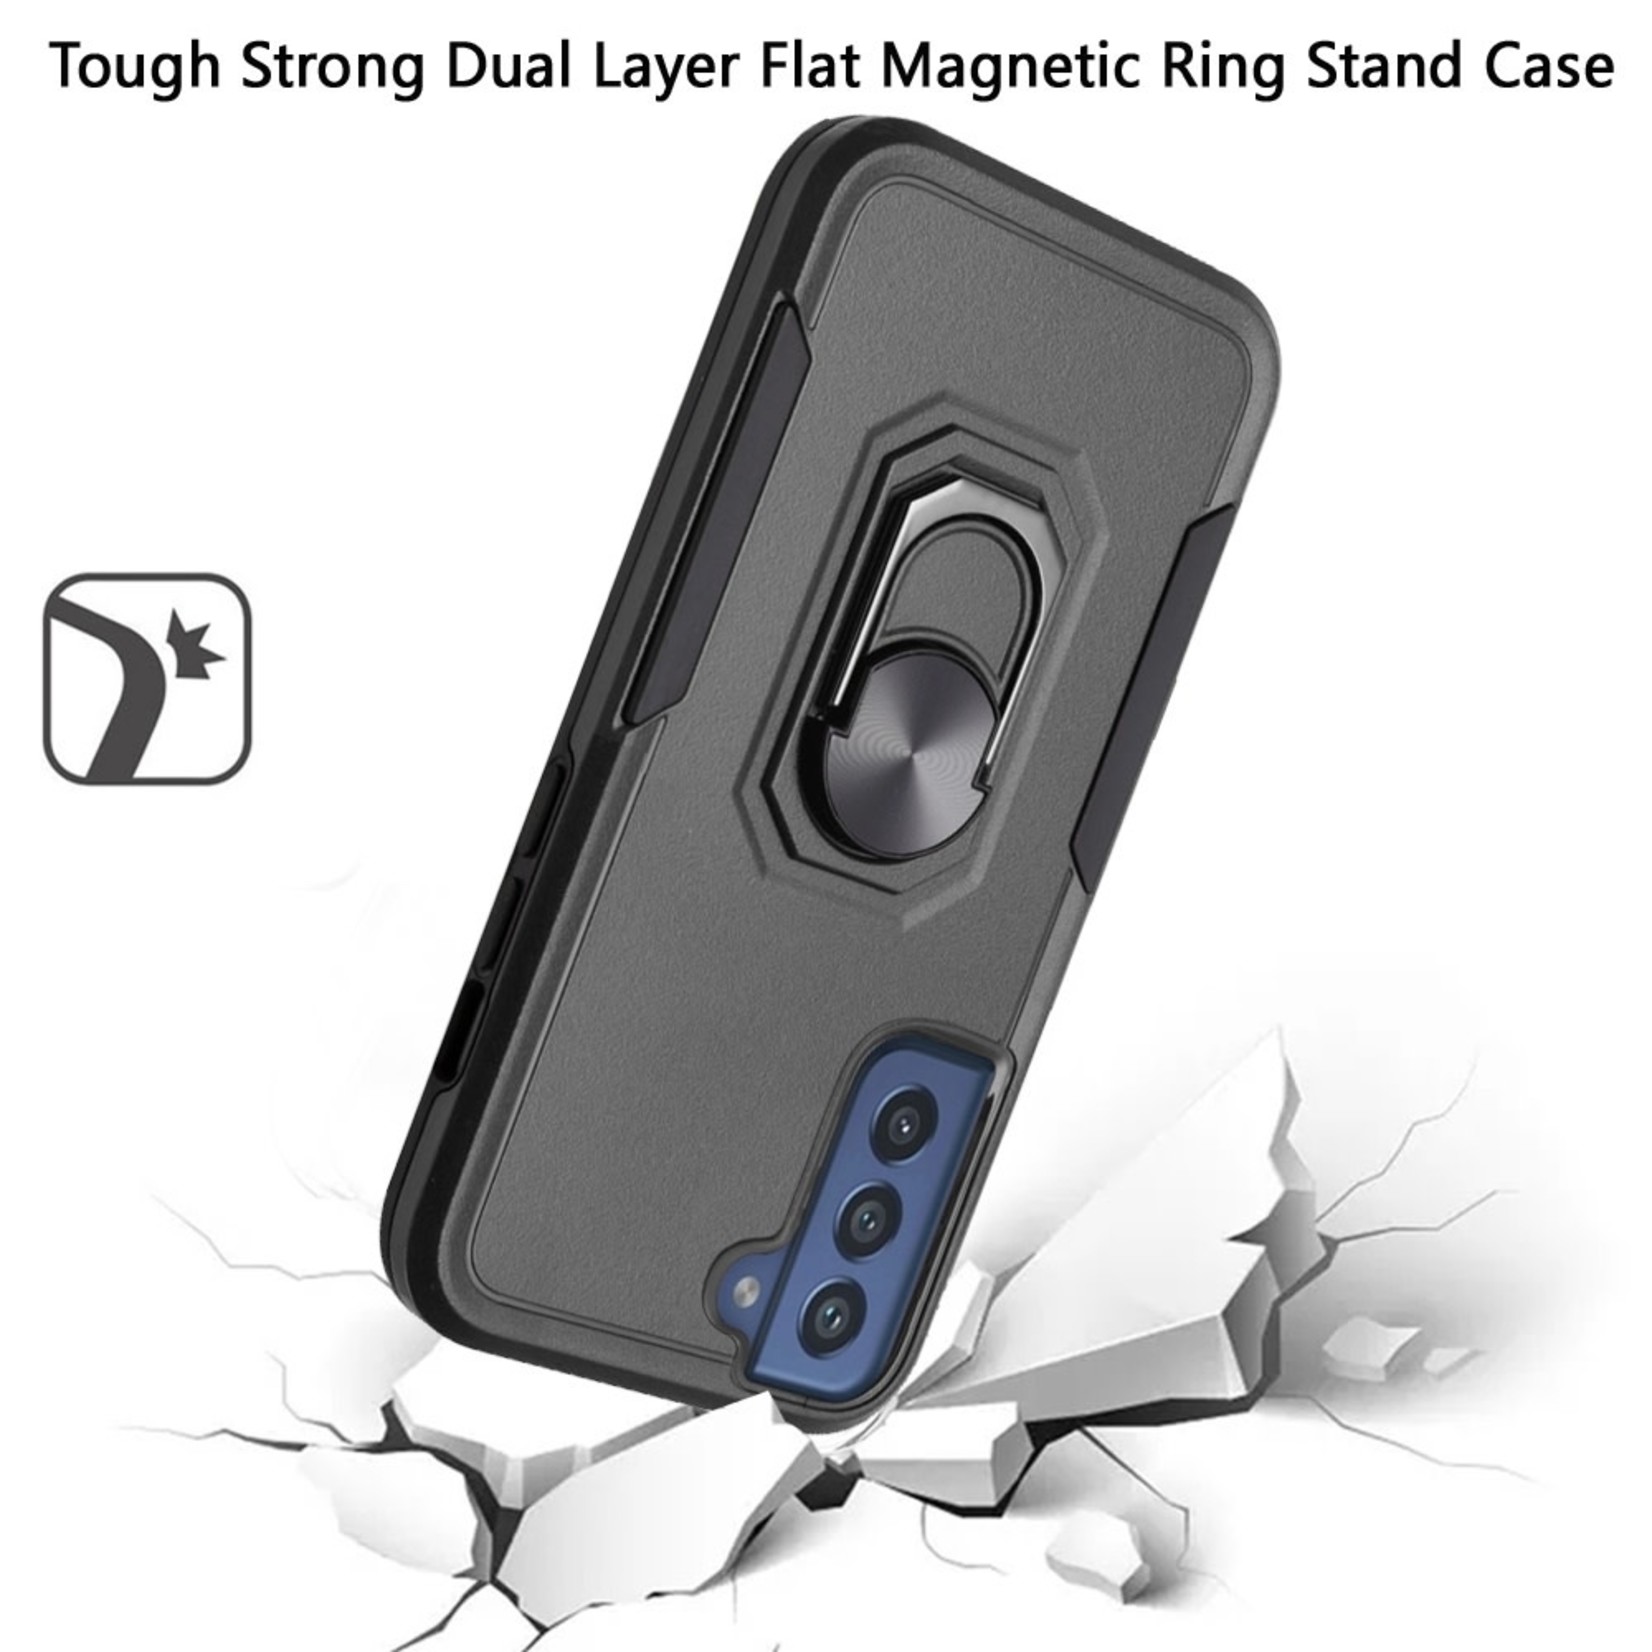 Samsung Tough Strong Dual Layer Flat Magnetic Ring Stand Case Cover - Black For Samsung Galaxy S22